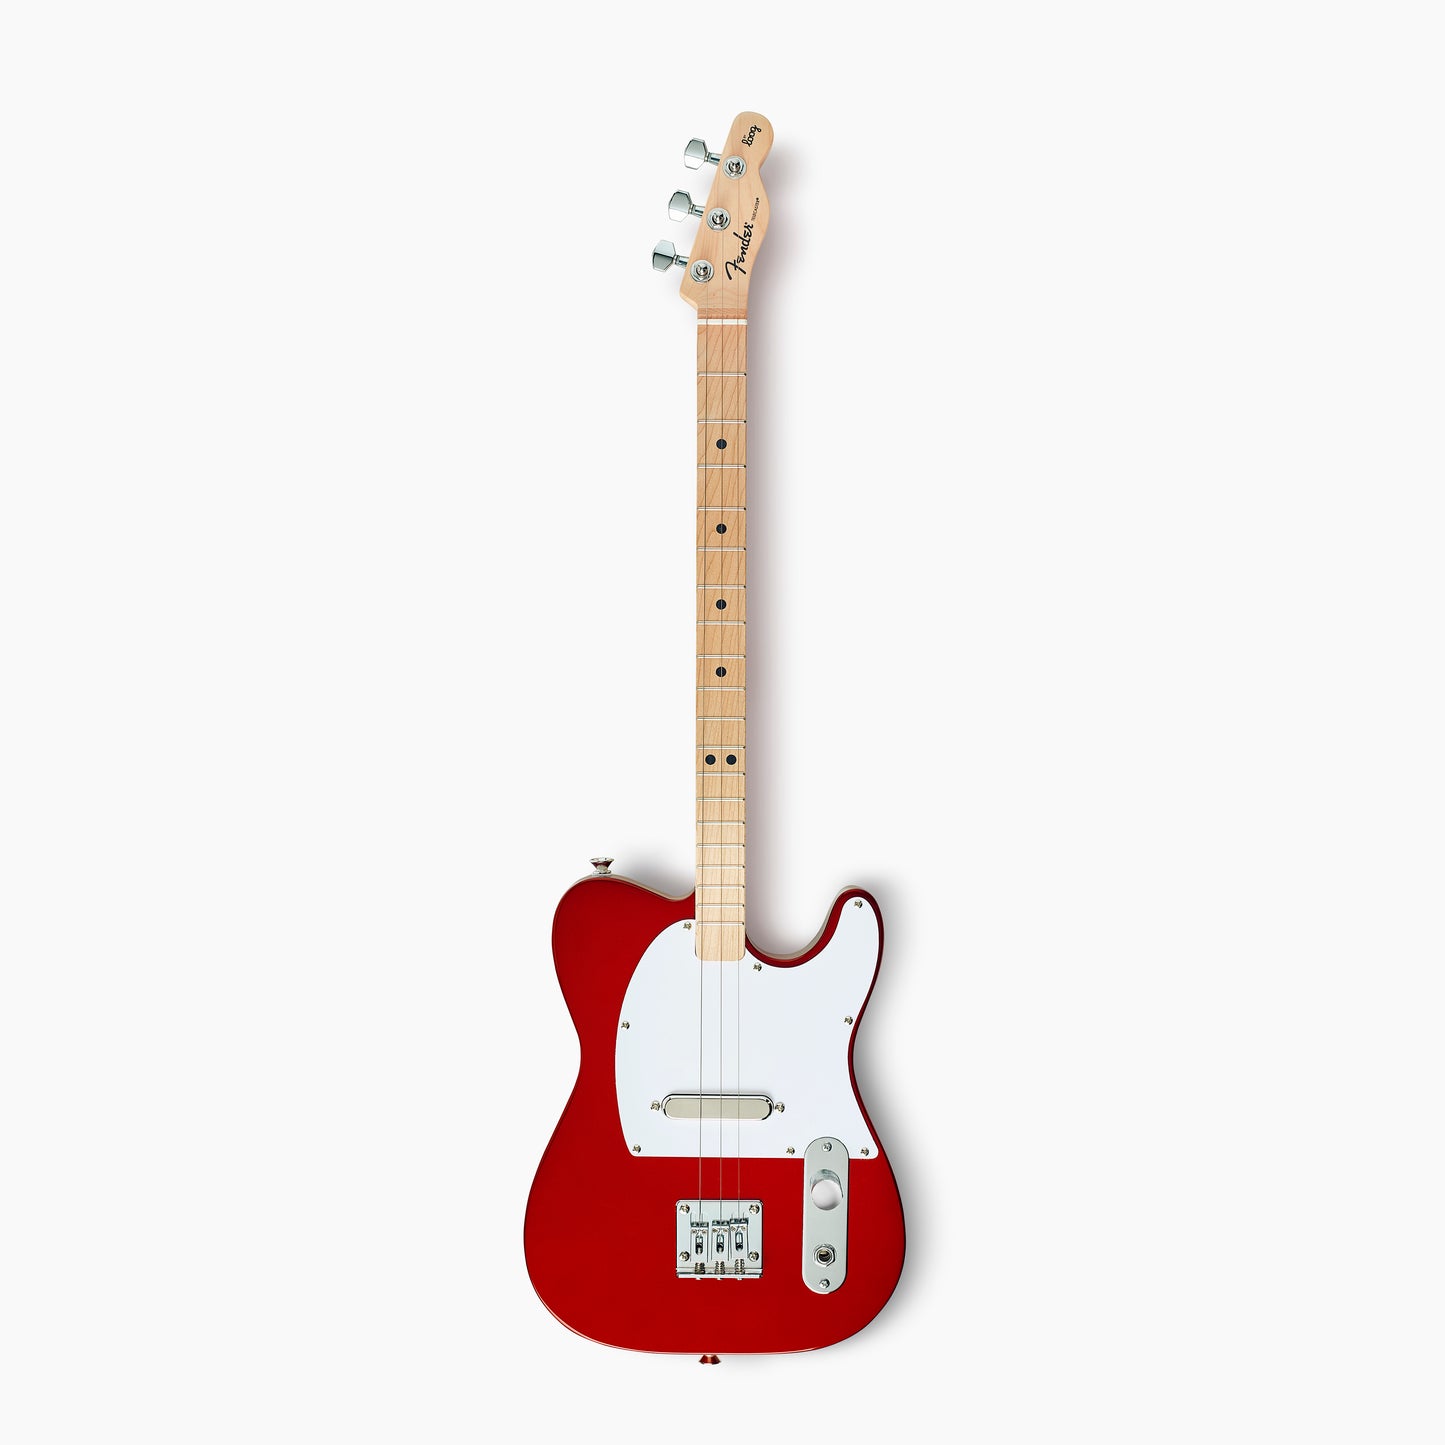 candy-apple-red telecaster candy apple red candy-apple-red-telecaster telecaster-candy-apple-red